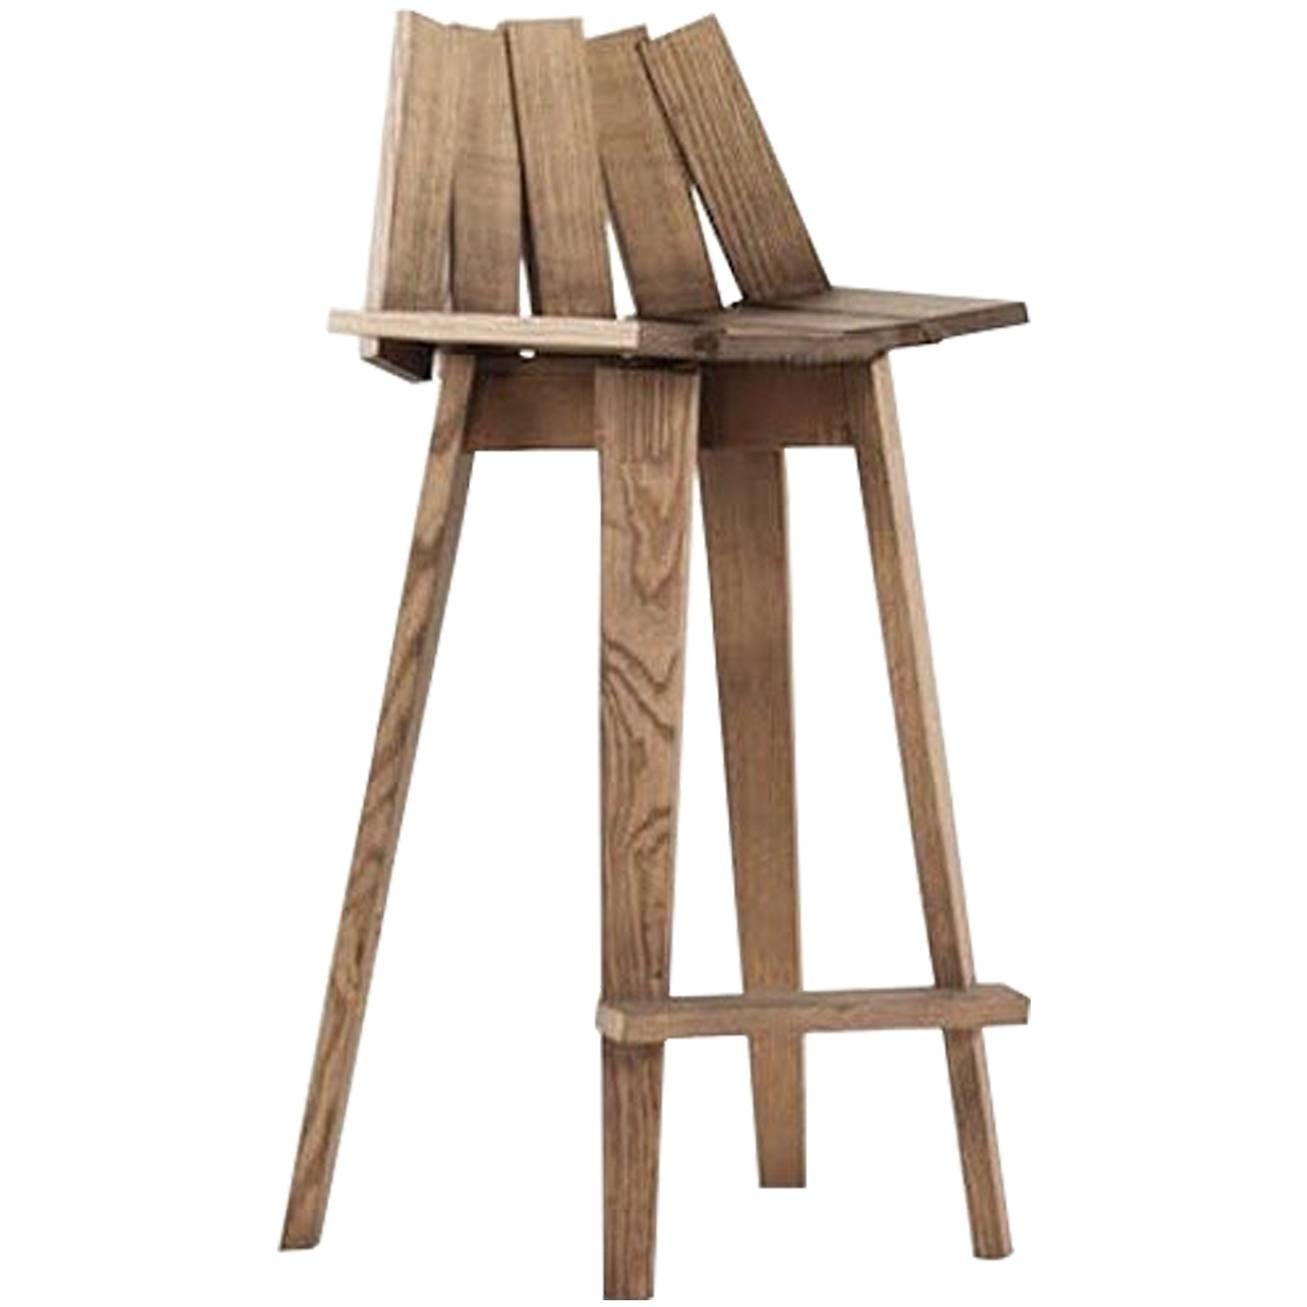 Frank Stool in Natural Finish by Alessandra Baldereschi & Mogg For Sale